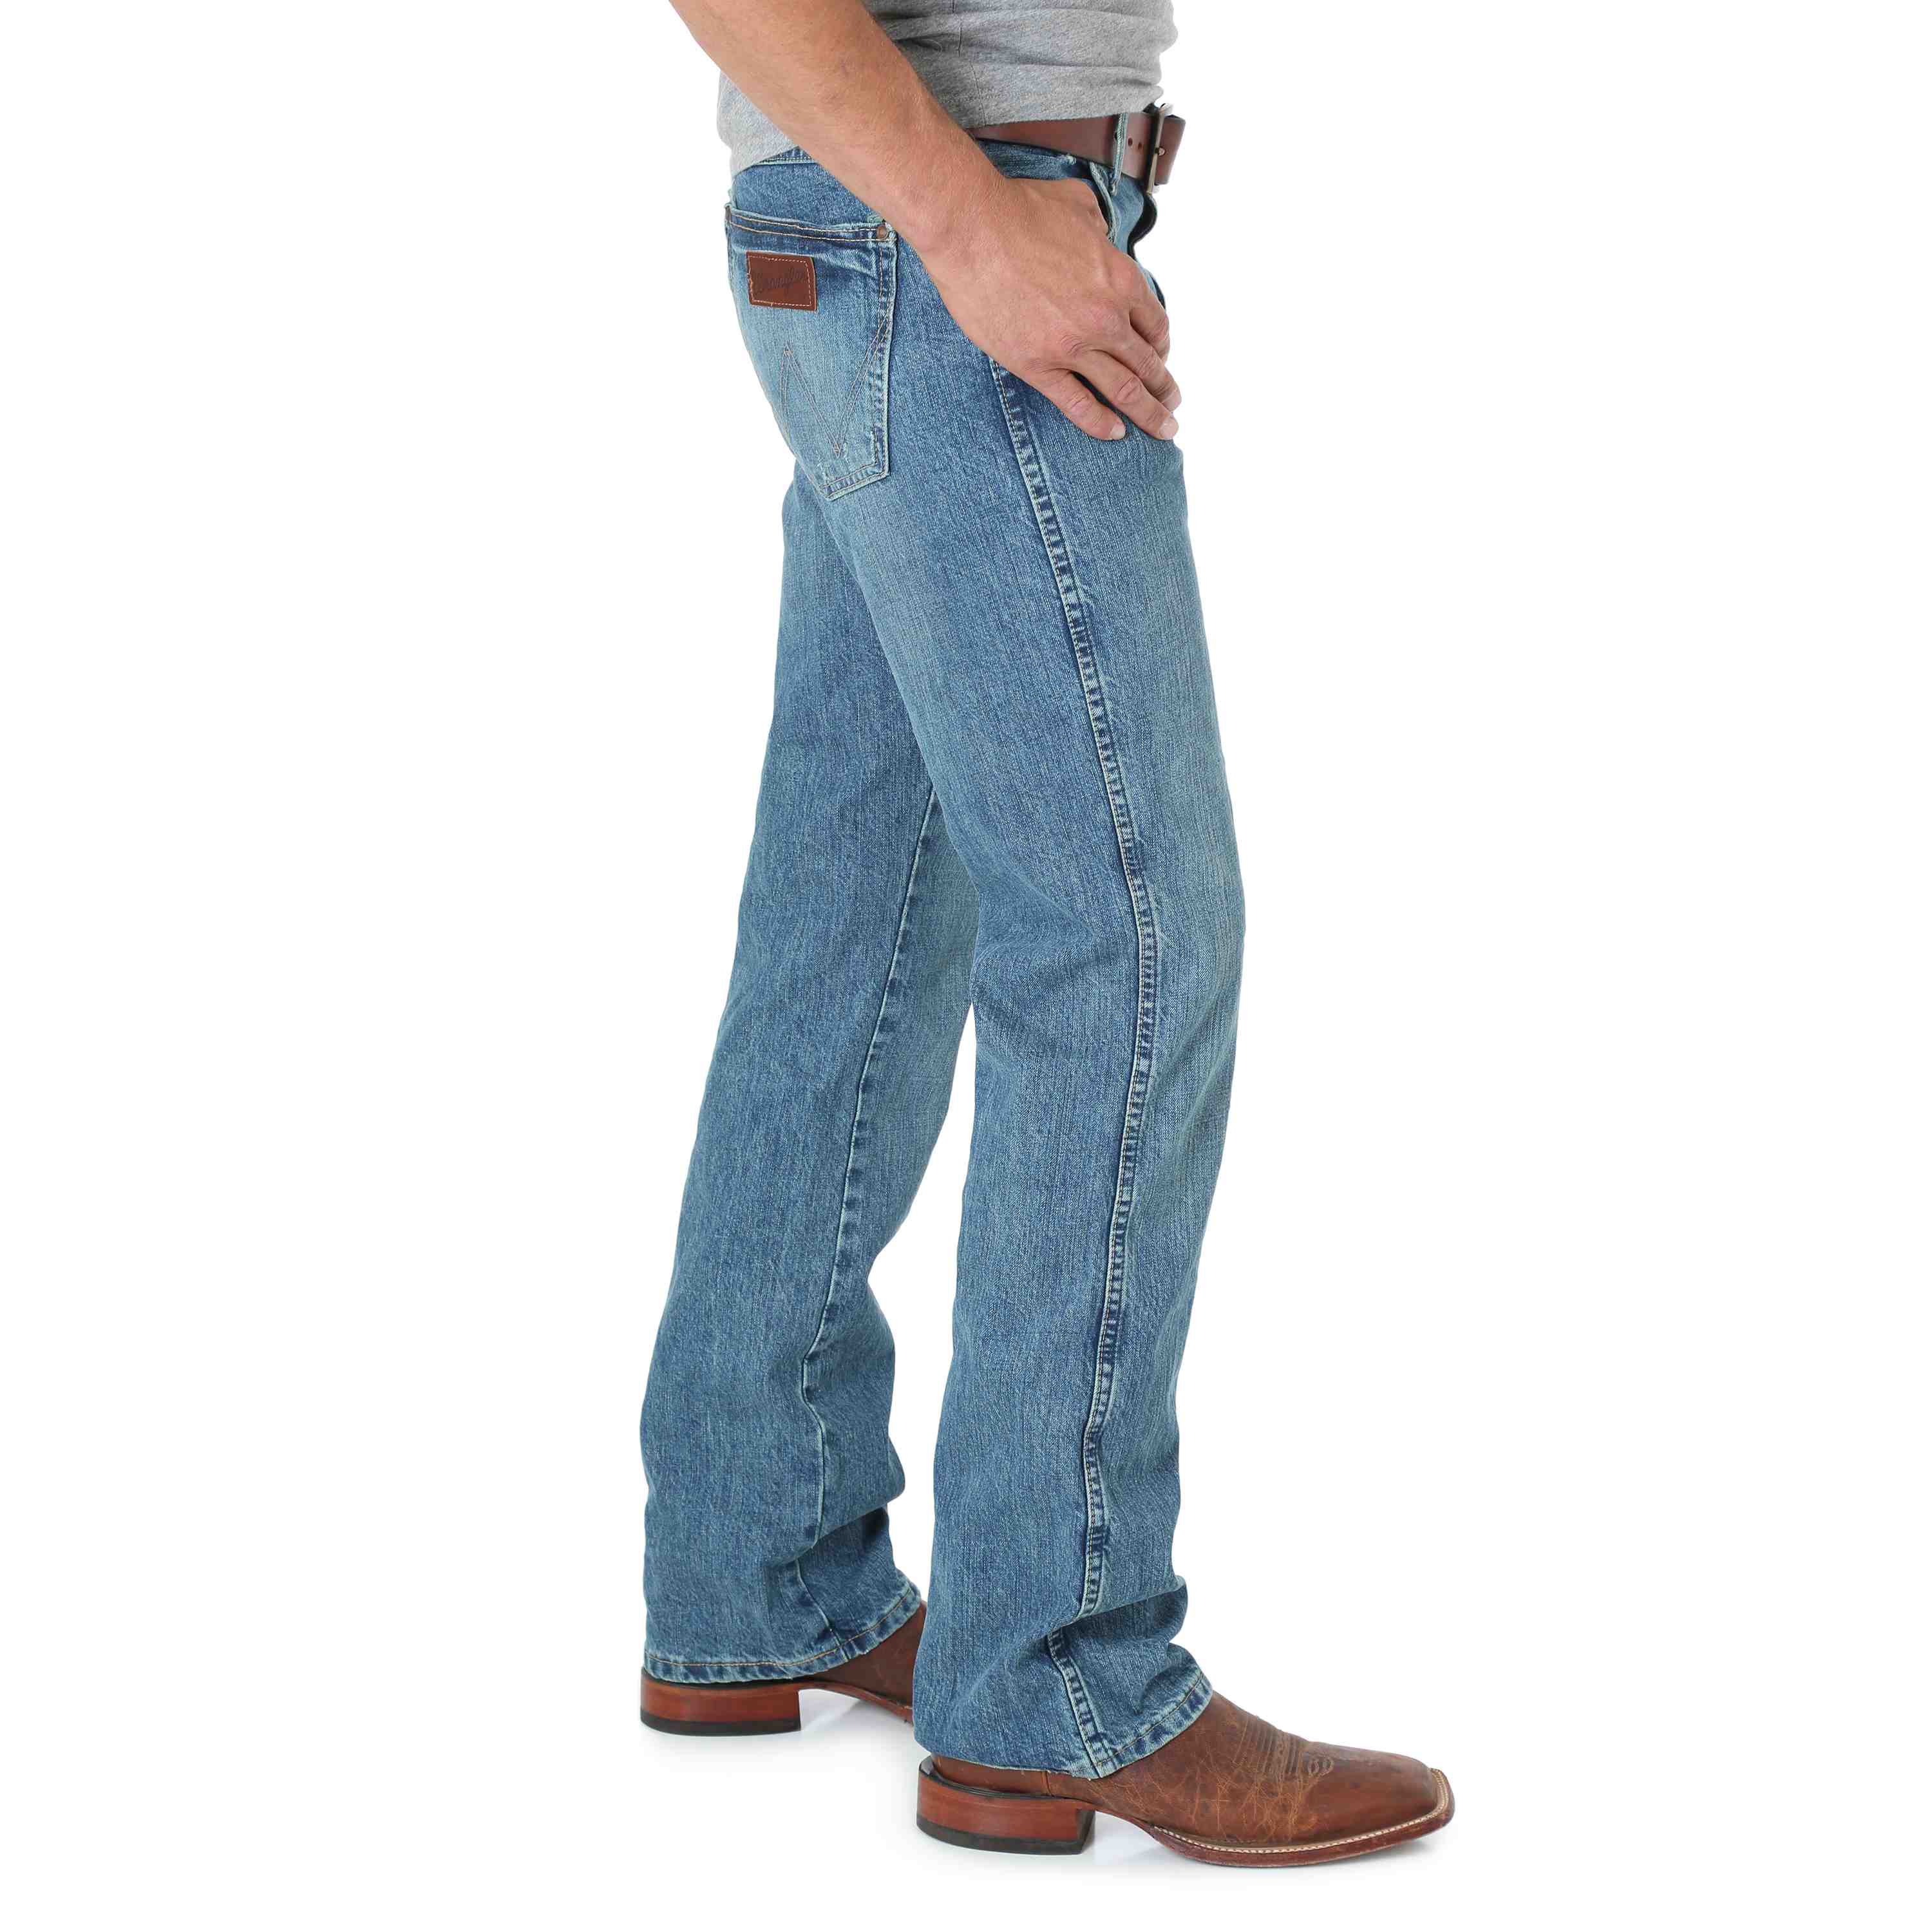 Men's Wrangler Retro Skinny Jeans with Cowboy Boots 